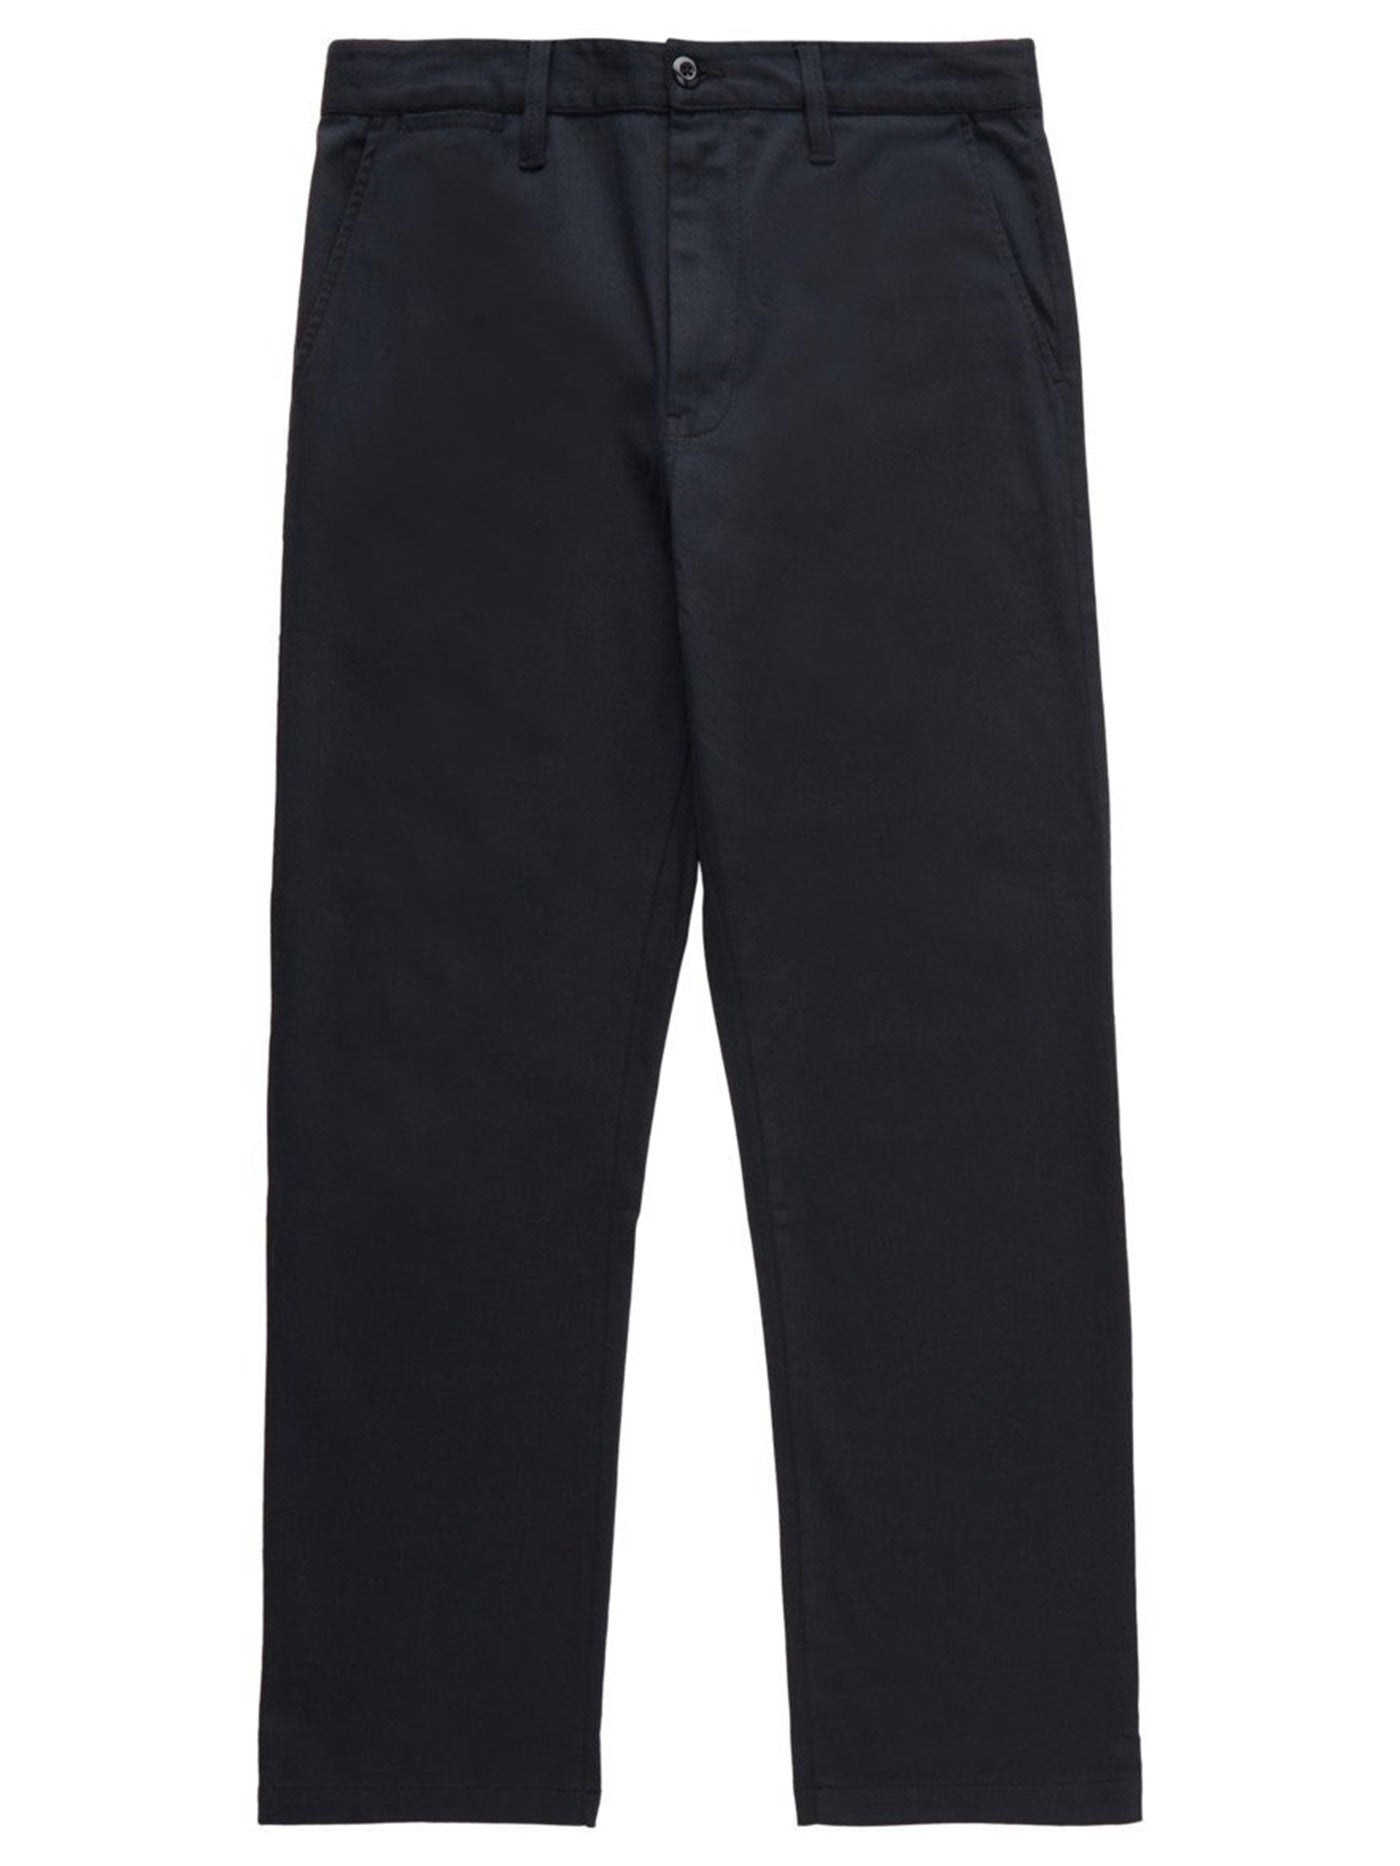 DC Worker Relaxed Fit Chino Pants